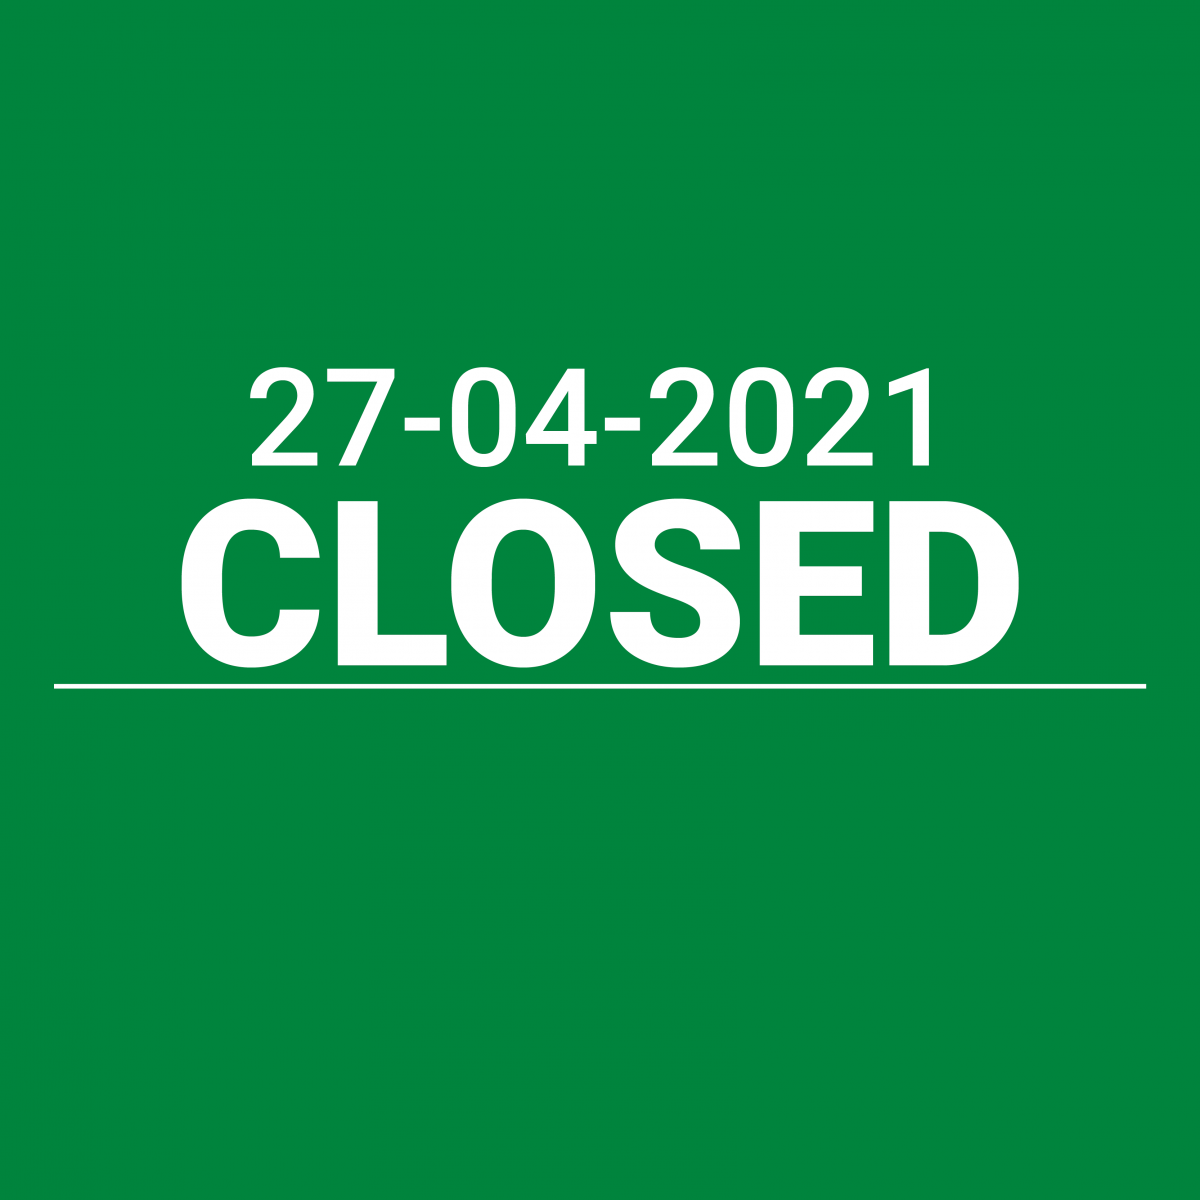 Closed during the national holiday King's Day (27-04-2021)